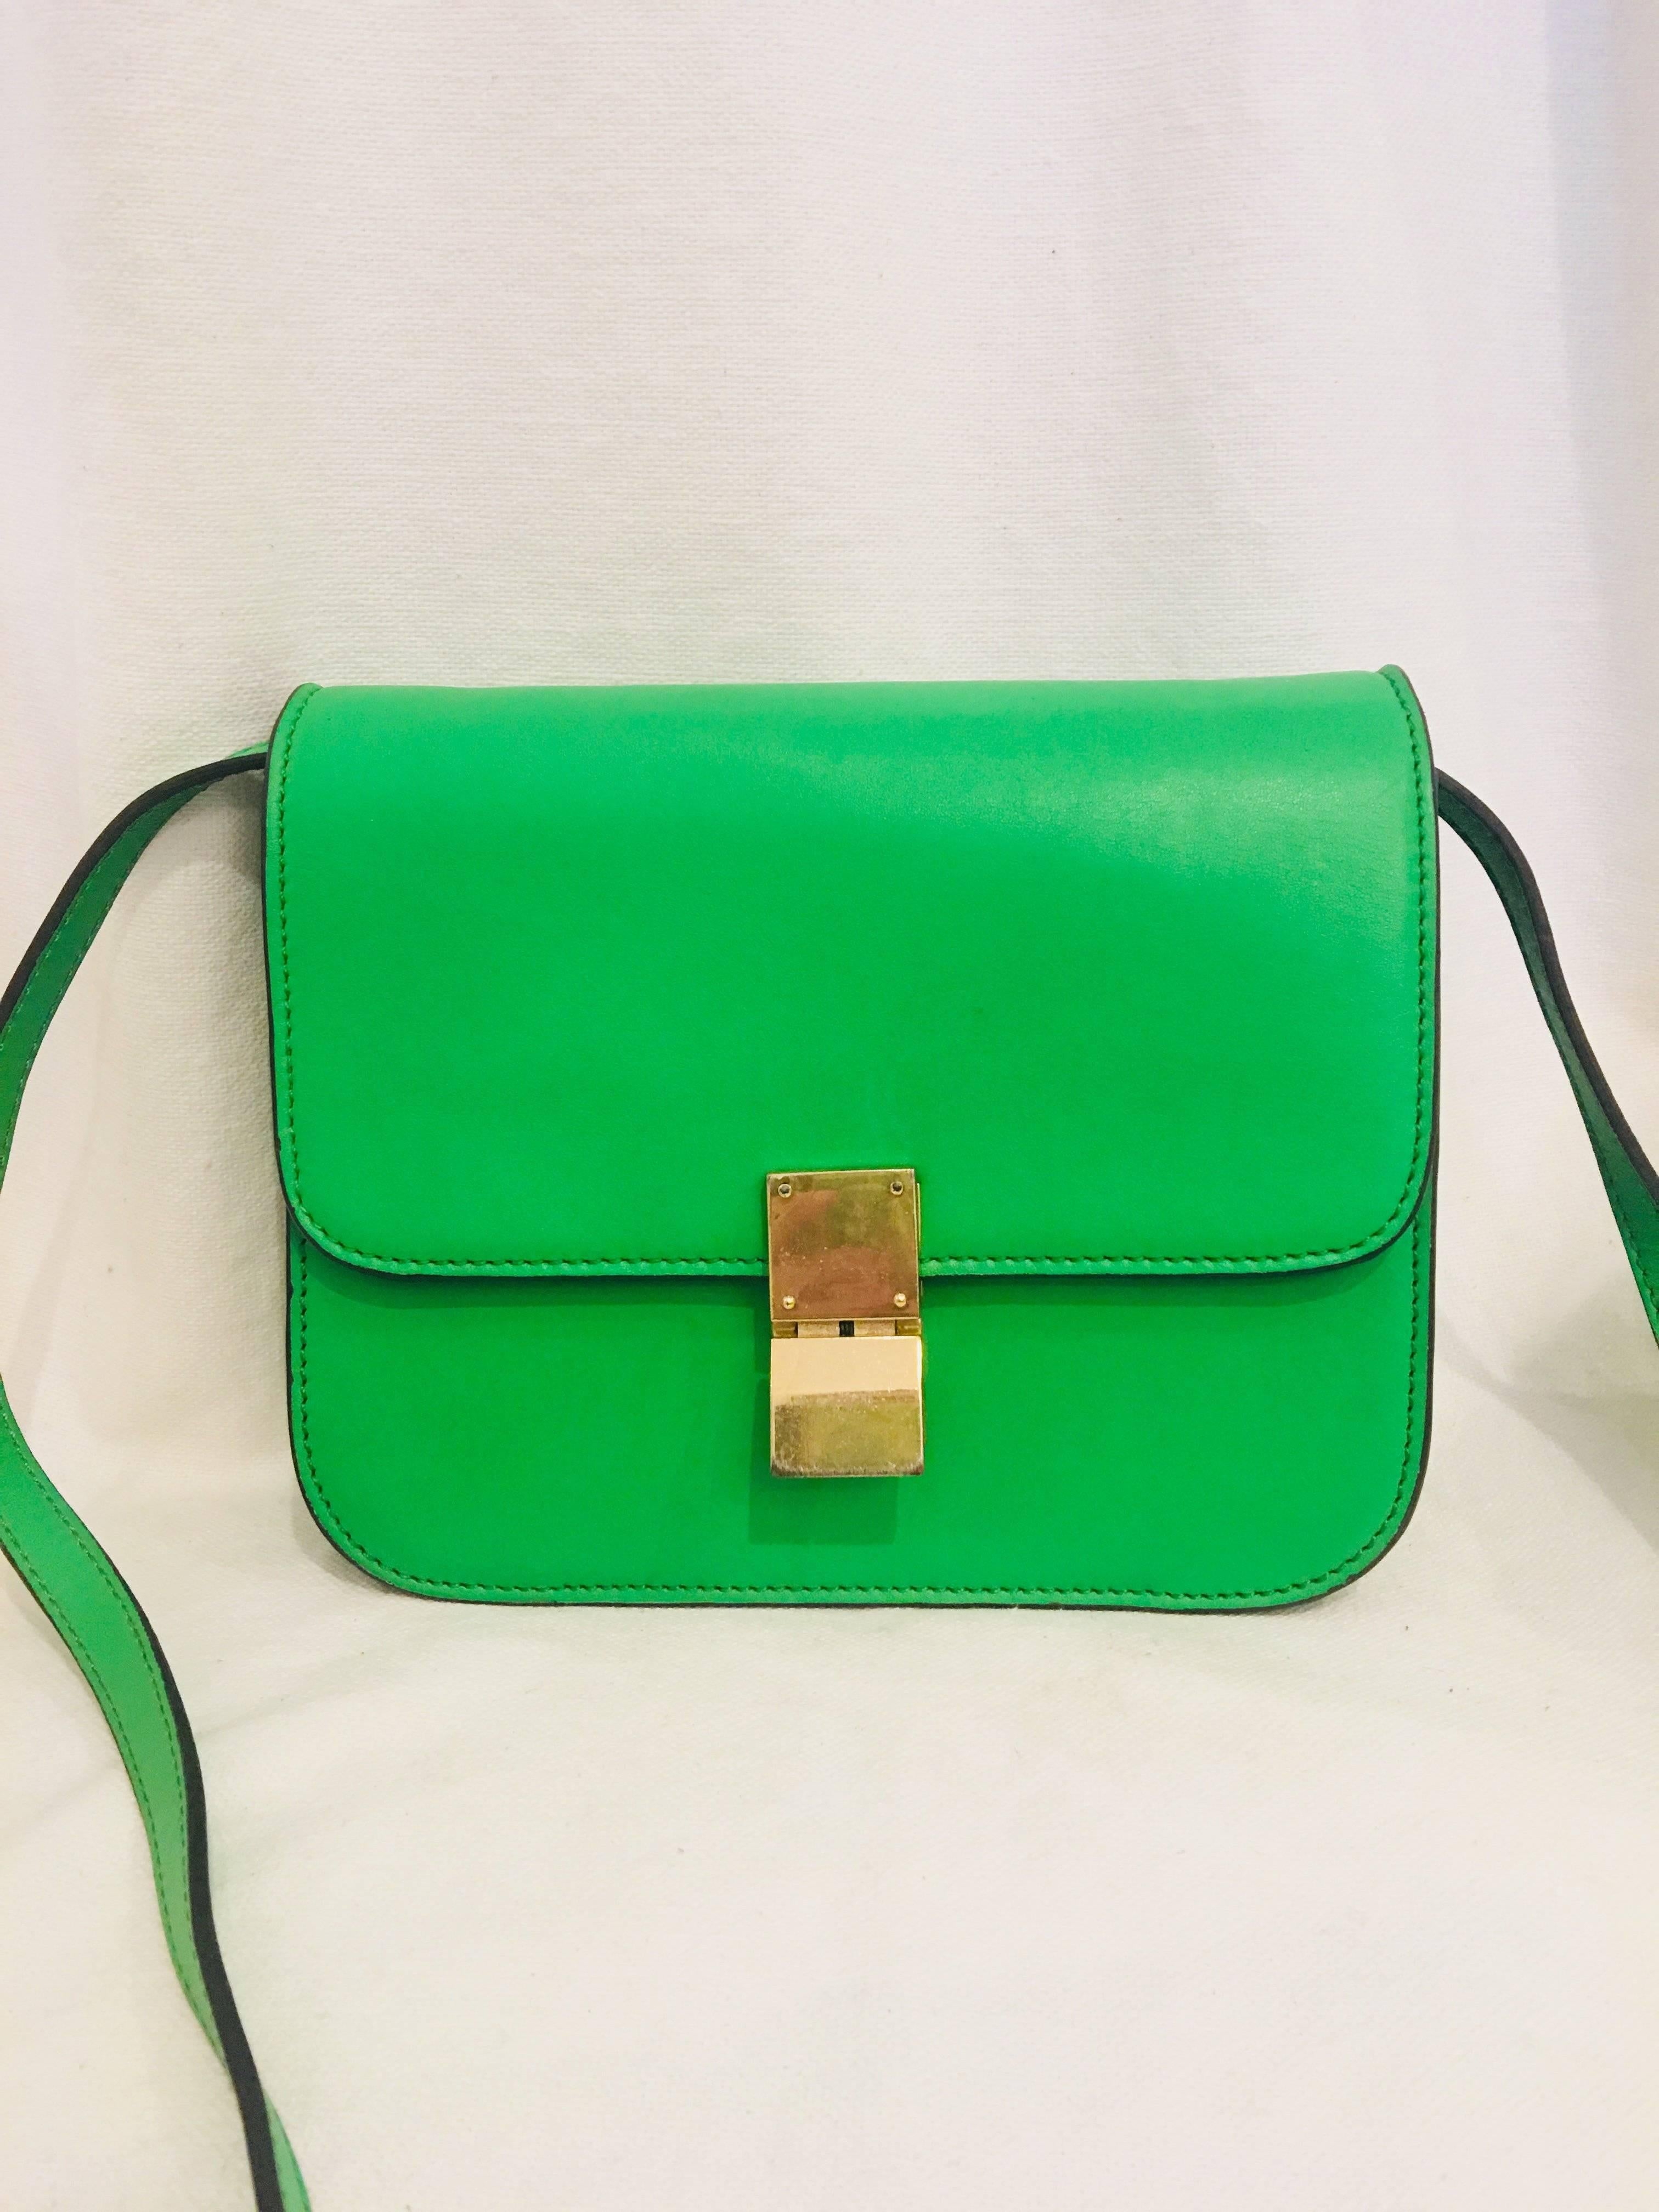 Celine Small Green Messenger with Gold Hardware and Crossbody Strap.